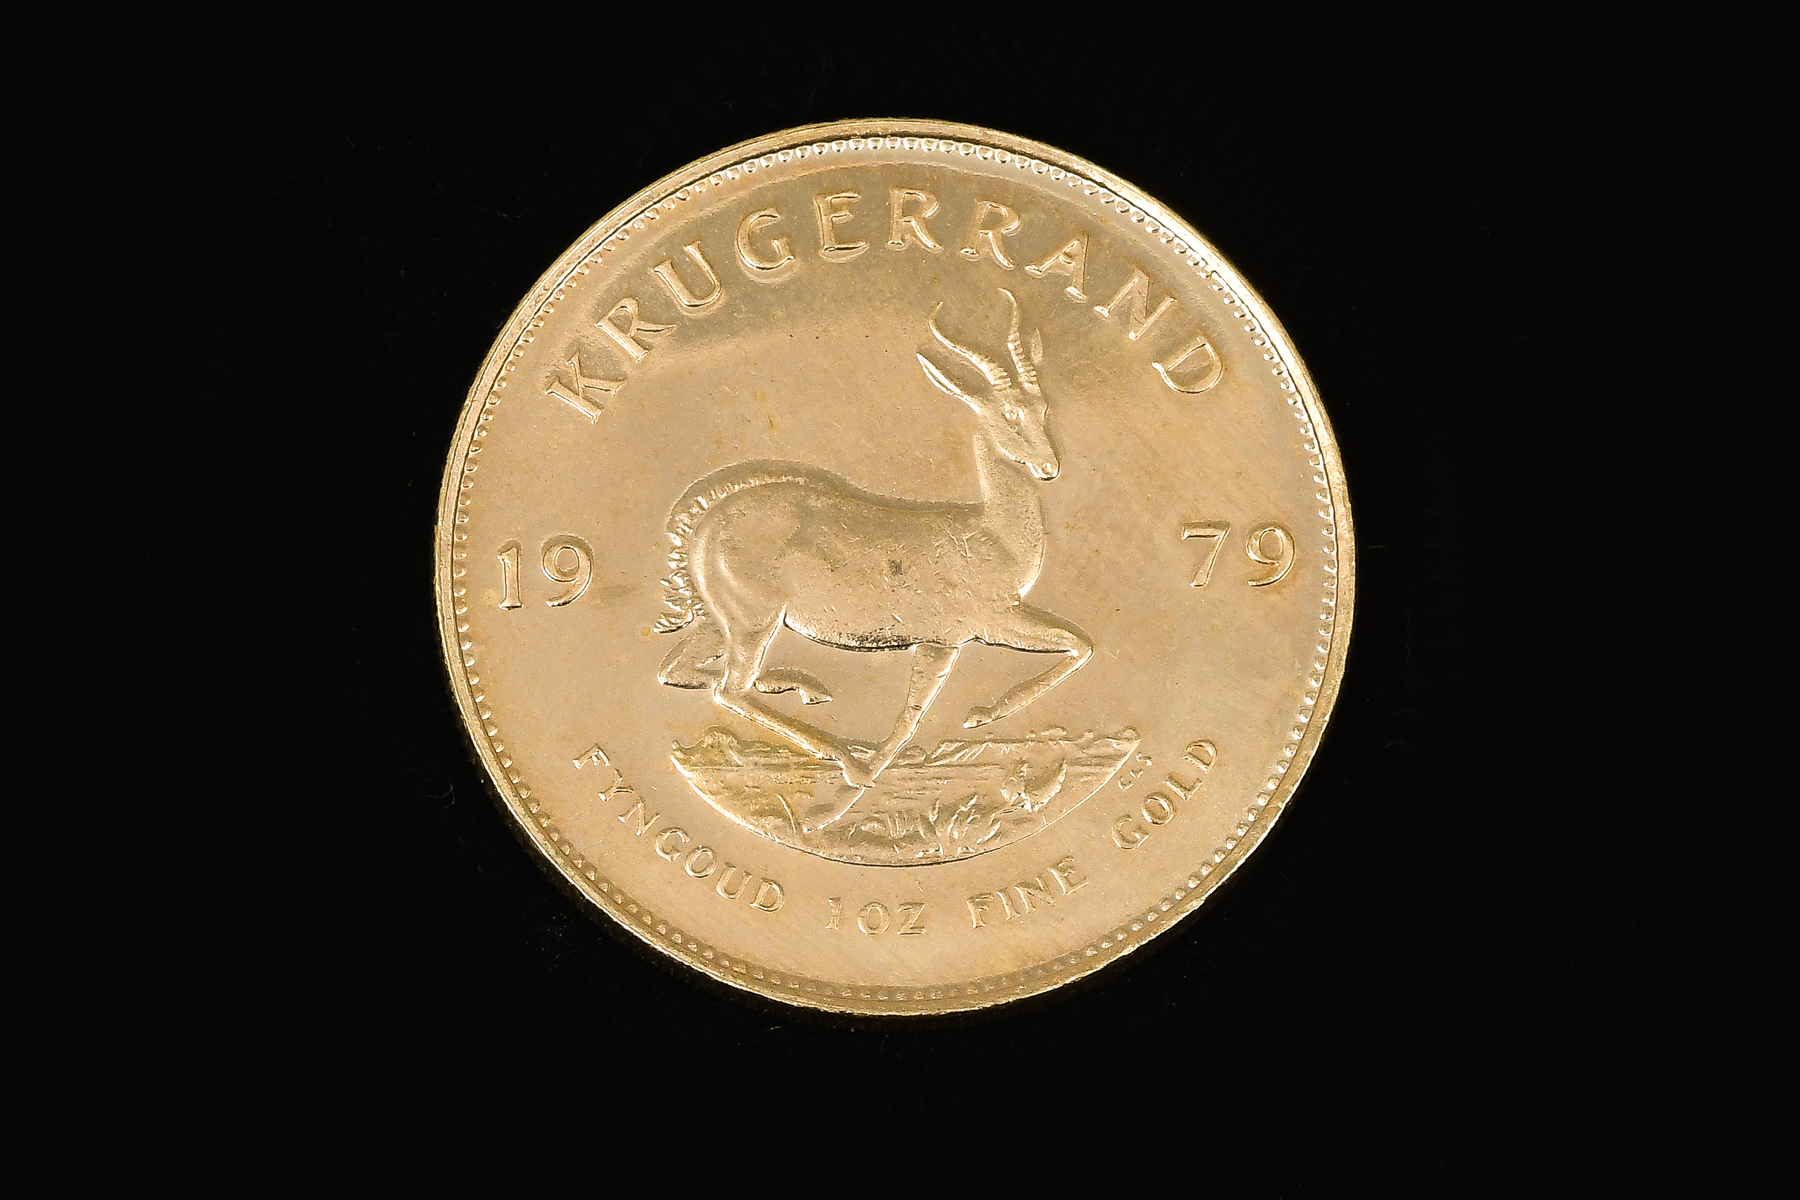 1979 AFRICAN 1 OUNCE PURE GOLD 30a0fc